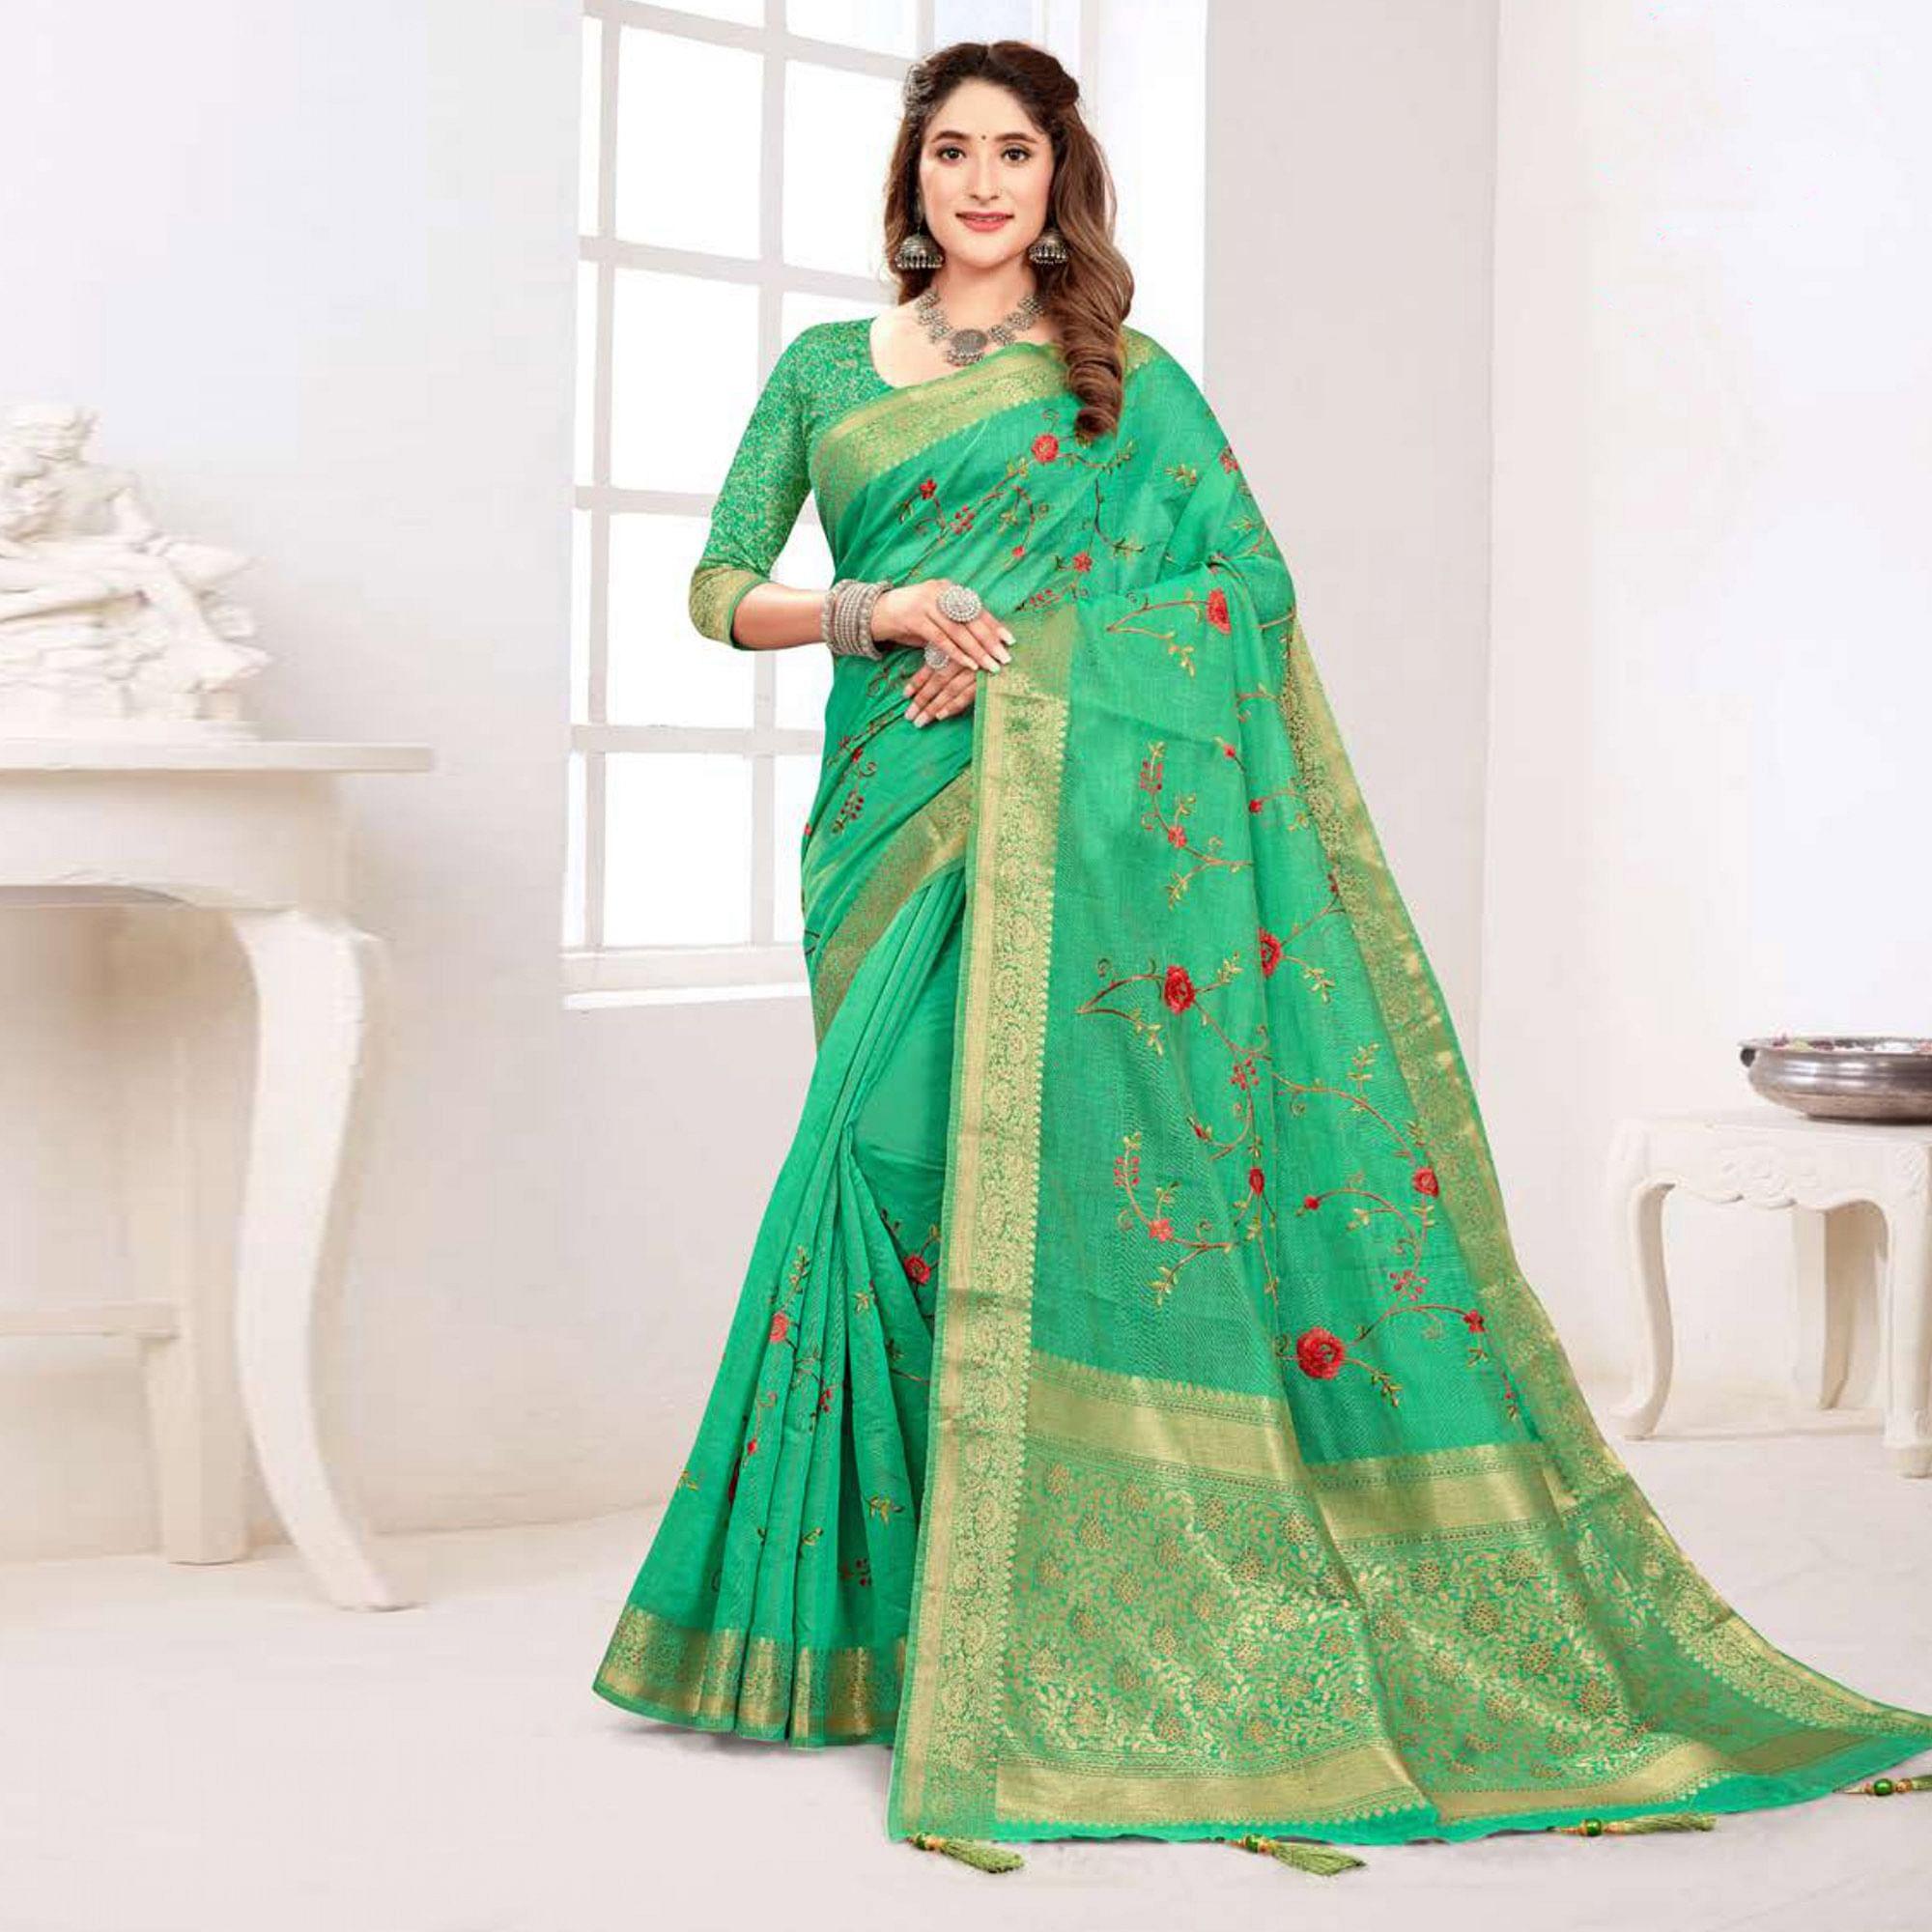 Green Floral Embroidered Cotton Silk Saree With Tassels - Peachmode